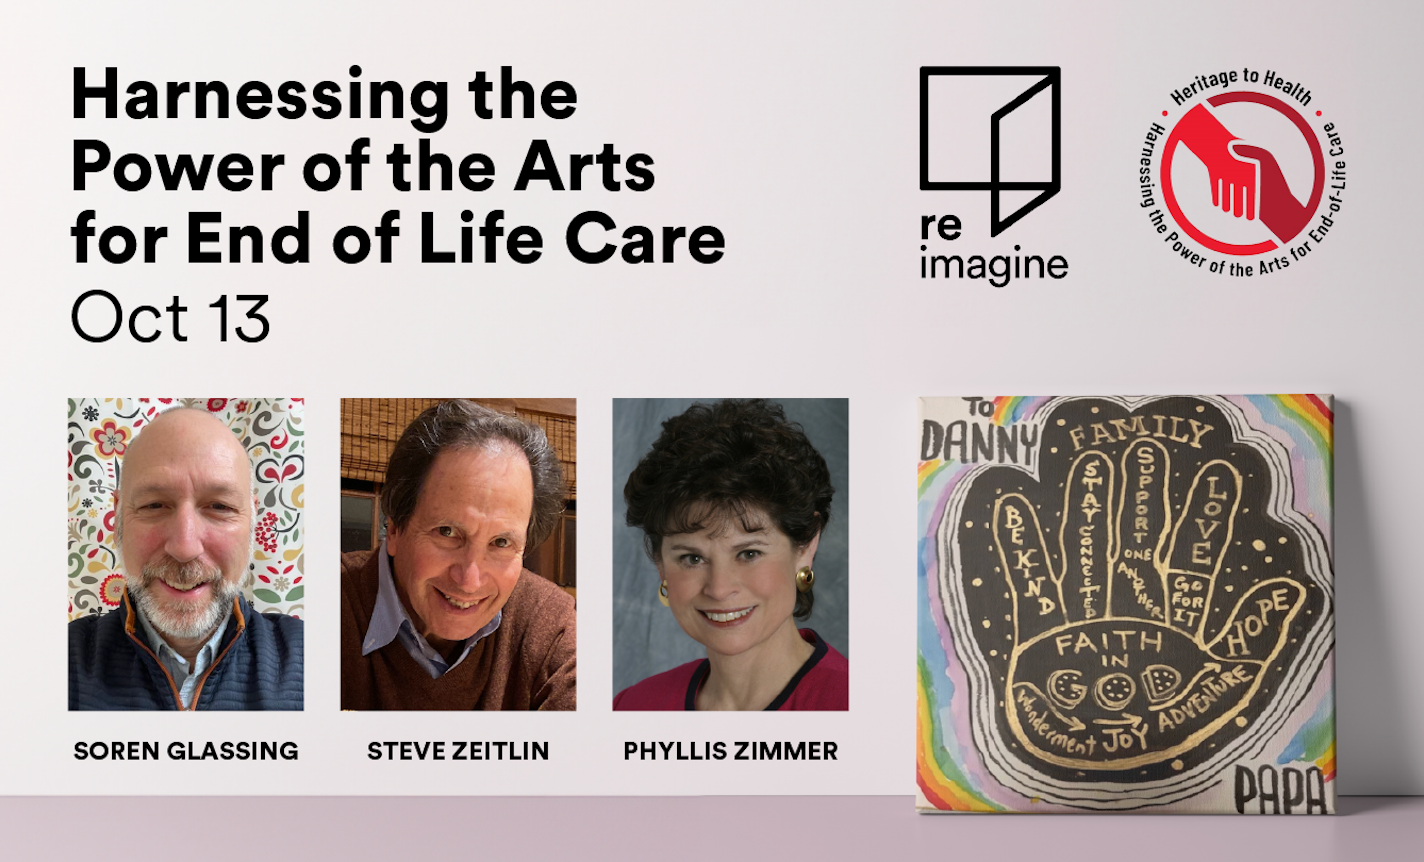 Harnessing the Power of the Arts for End of Life Care